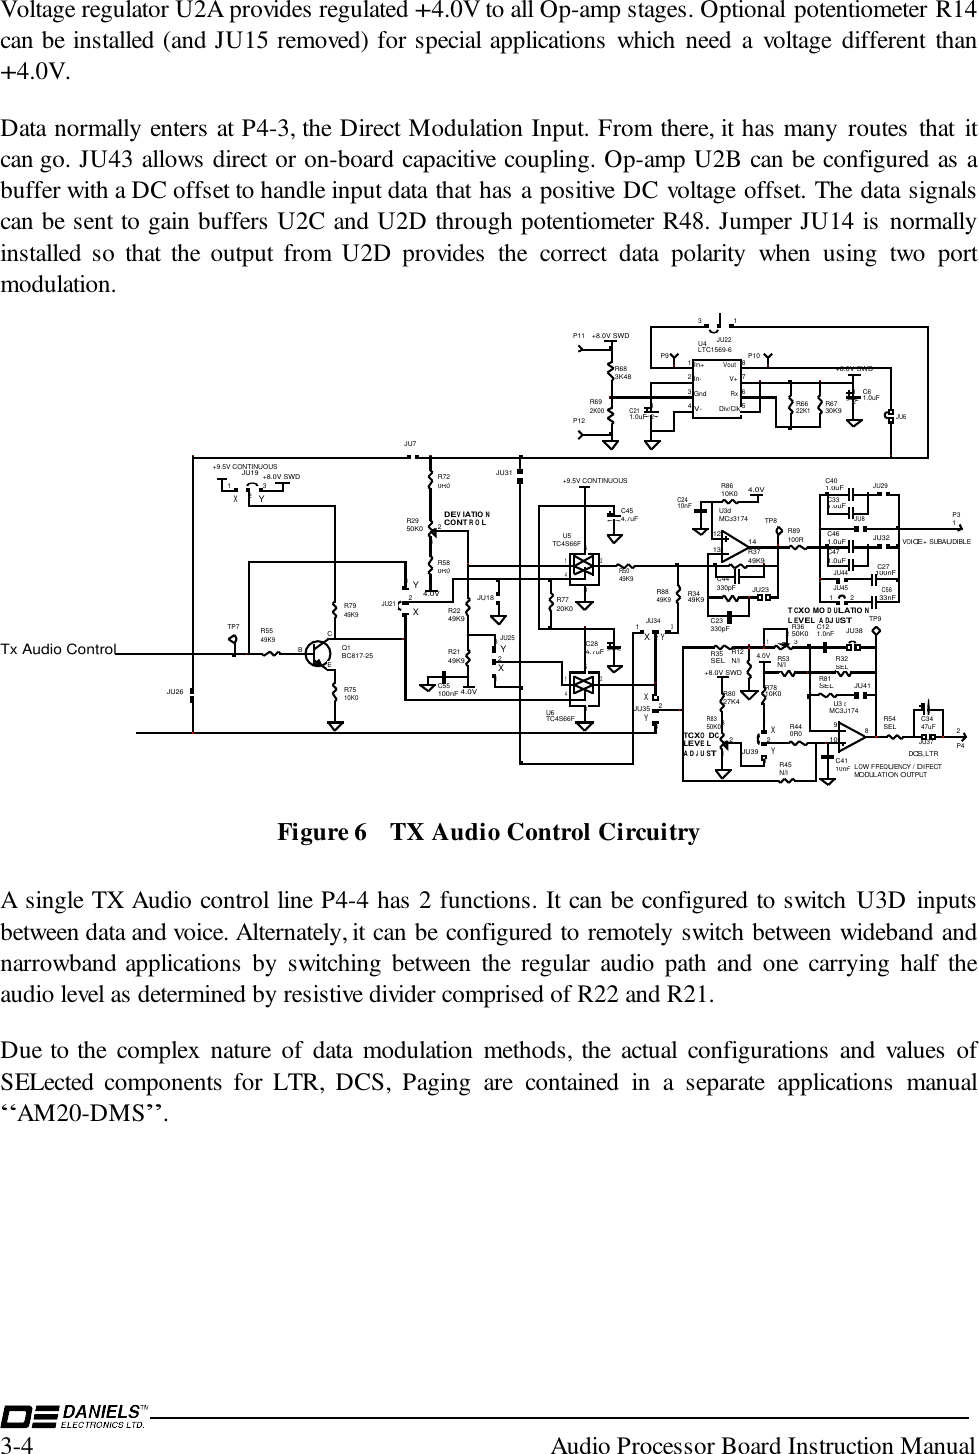 3-4  Audio Processor Board Instruction ManualVoltage regulator U2A provides regulated +4.0V to all Op-amp stages. Optional potentiometer R14can be installed (and JU15 removed) for special applications which need a voltage different than+4.0V.Data normally enters at P4-3, the Direct Modulation Input. From there, it has many routes that itcan go. JU43 allows direct or on-board capacitive coupling. Op-amp U2B can be configured as abuffer with a DC offset to handle input data that has a positive DC voltage offset. The data signalscan be sent to gain buffers U2C and U2D through potentiometer R48. Jumper JU14 is normallyinstalled so that the output from U2D provides the correct data polarity when using two portmodulation.XYDEVIATIONCONTROLLOW FREQUENCY /  DIRECT MODULATION  OUTPUTXYXYXYXYVOICE + SUBAUDIBLEDCS, LTRXYTCXO DCLEVELA DJUSTTCXO MOD ULATIONLEVEL  A DJUST1P32P4JU37213JU22+9.5V CONTINUOUS4.7uFC454.7uFC28123R2950K0R5549K9R7510K0EBCQ1BC817-25+8.0V SWDJU6JU31R440R0R45N/IC121.0nFR54SEL123R3650K0JU32SELR32JU2947uFC34R12N/IR7949K9JU7 In+ In- Gnd V-Vout V+  Rx Div/Clk 12348765U4LTC1569-6R6622K1R6730K9R683K48R692K00+8.0V SWDP11P12P9 P109108U3MC33174c0R0R720R0R5812C211.0uF12C61.0uFR3749K9R3449K94.0VC2410nF+8.0V SWD4.0VJU23TP7TP8TP9SELR81JU4110nFC41R8610K0321R8350K0R53N/IR8027K4+8.0V SWD123JU35R7810K0231JU39123JU34JU38C23330pFC44330pF131214U3MC33174dR35SELJU8100nFC271.0uFC331.0uFC401.0uFC471.0uFC46123JU25R2249K9R2149K91 2345U5TC4S66F1 2345U6TC4S66F4.0VR5049K9R8849K9JU264.0VC55100nFJU4433nFC56+9.5V CONTINUOUSR7720K0JU1821 3JU19231JU211 2JU45R89100RTx Audio ControlFigure 6 TX Audio Control CircuitryA single TX Audio control line P4-4 has 2 functions. It can be configured to switch U3D inputsbetween data and voice. Alternately, it can be configured to remotely switch between wideband andnarrowband applications by switching between the regular audio path and one carrying half theaudio level as determined by resistive divider comprised of R22 and R21.Due to the complex nature of data modulation methods, the actual configurations and values ofSELected components for LTR, DCS, Paging are contained in a separate applications manual“AM20-DMS”.